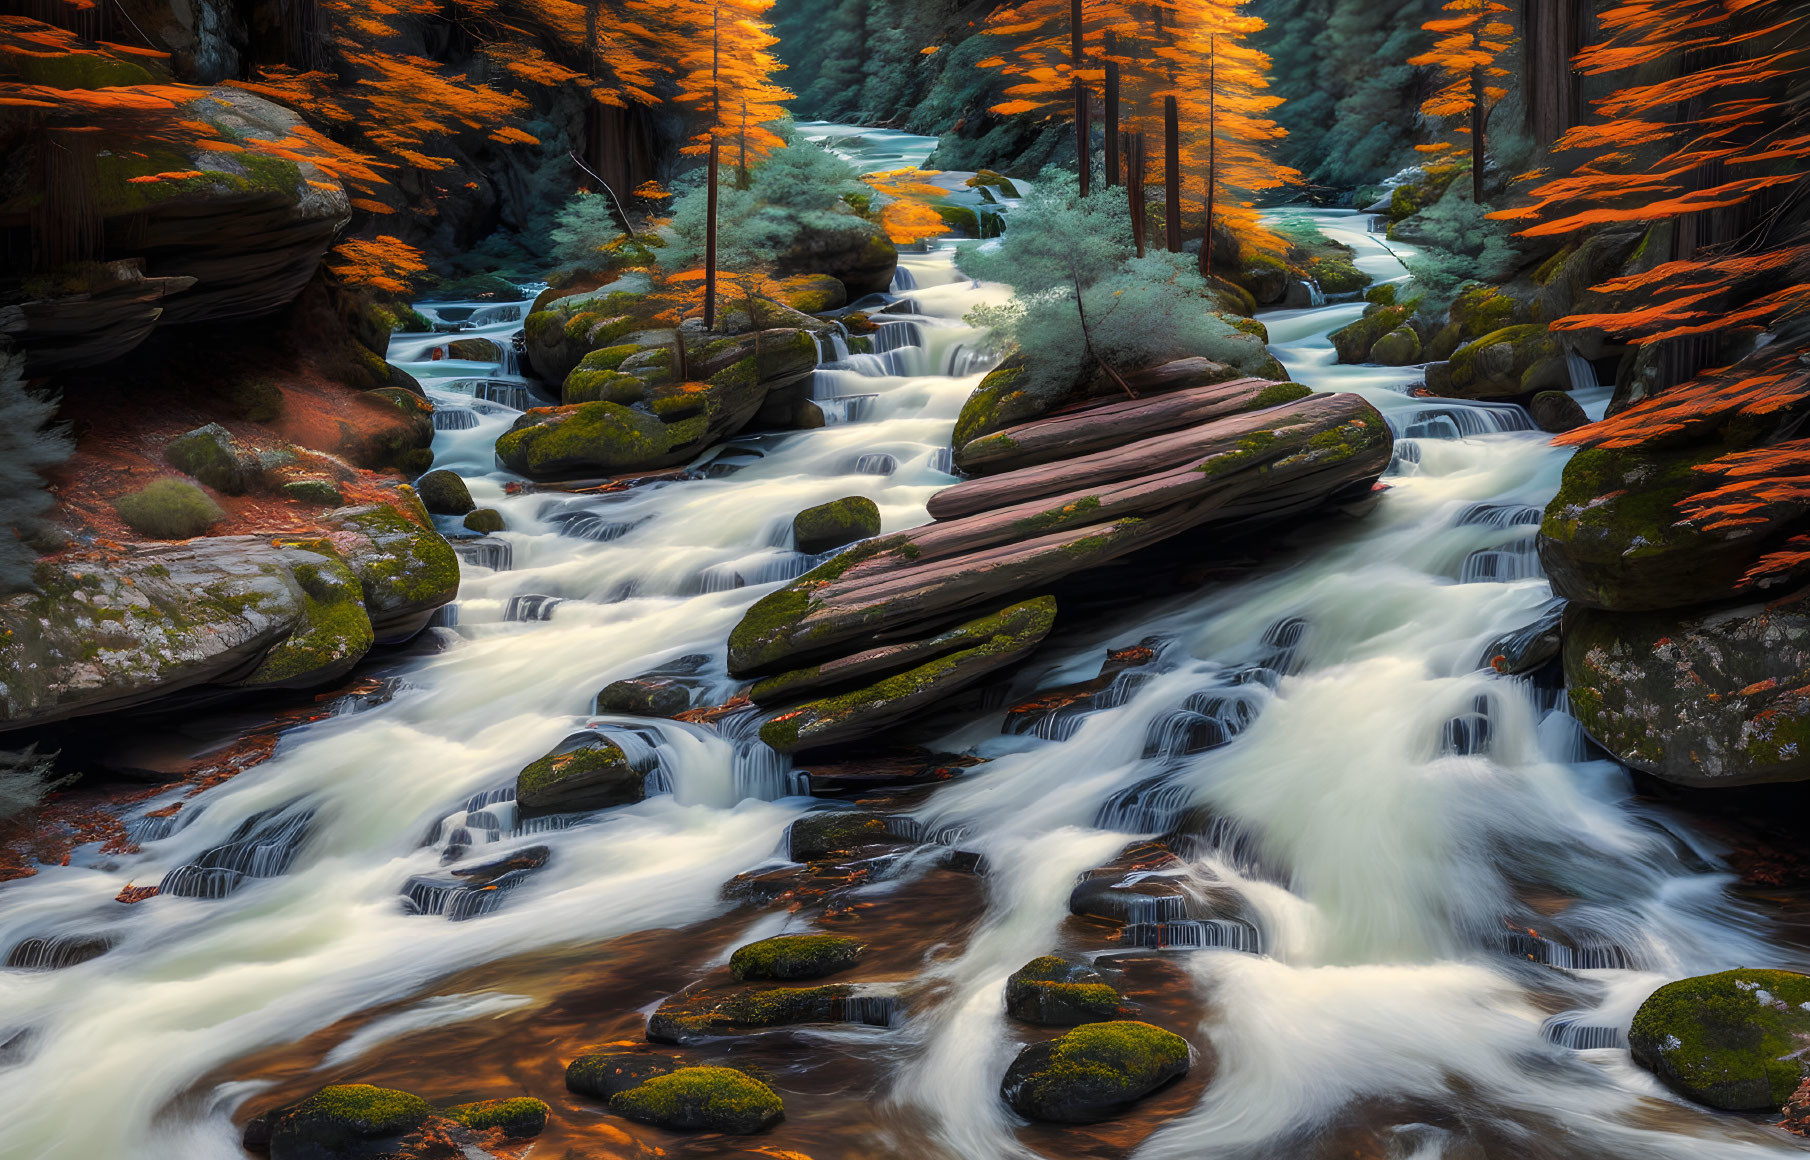 Tranquil river scene with autumn foliage, rushing waters, moss-covered rocks, and towering trees.